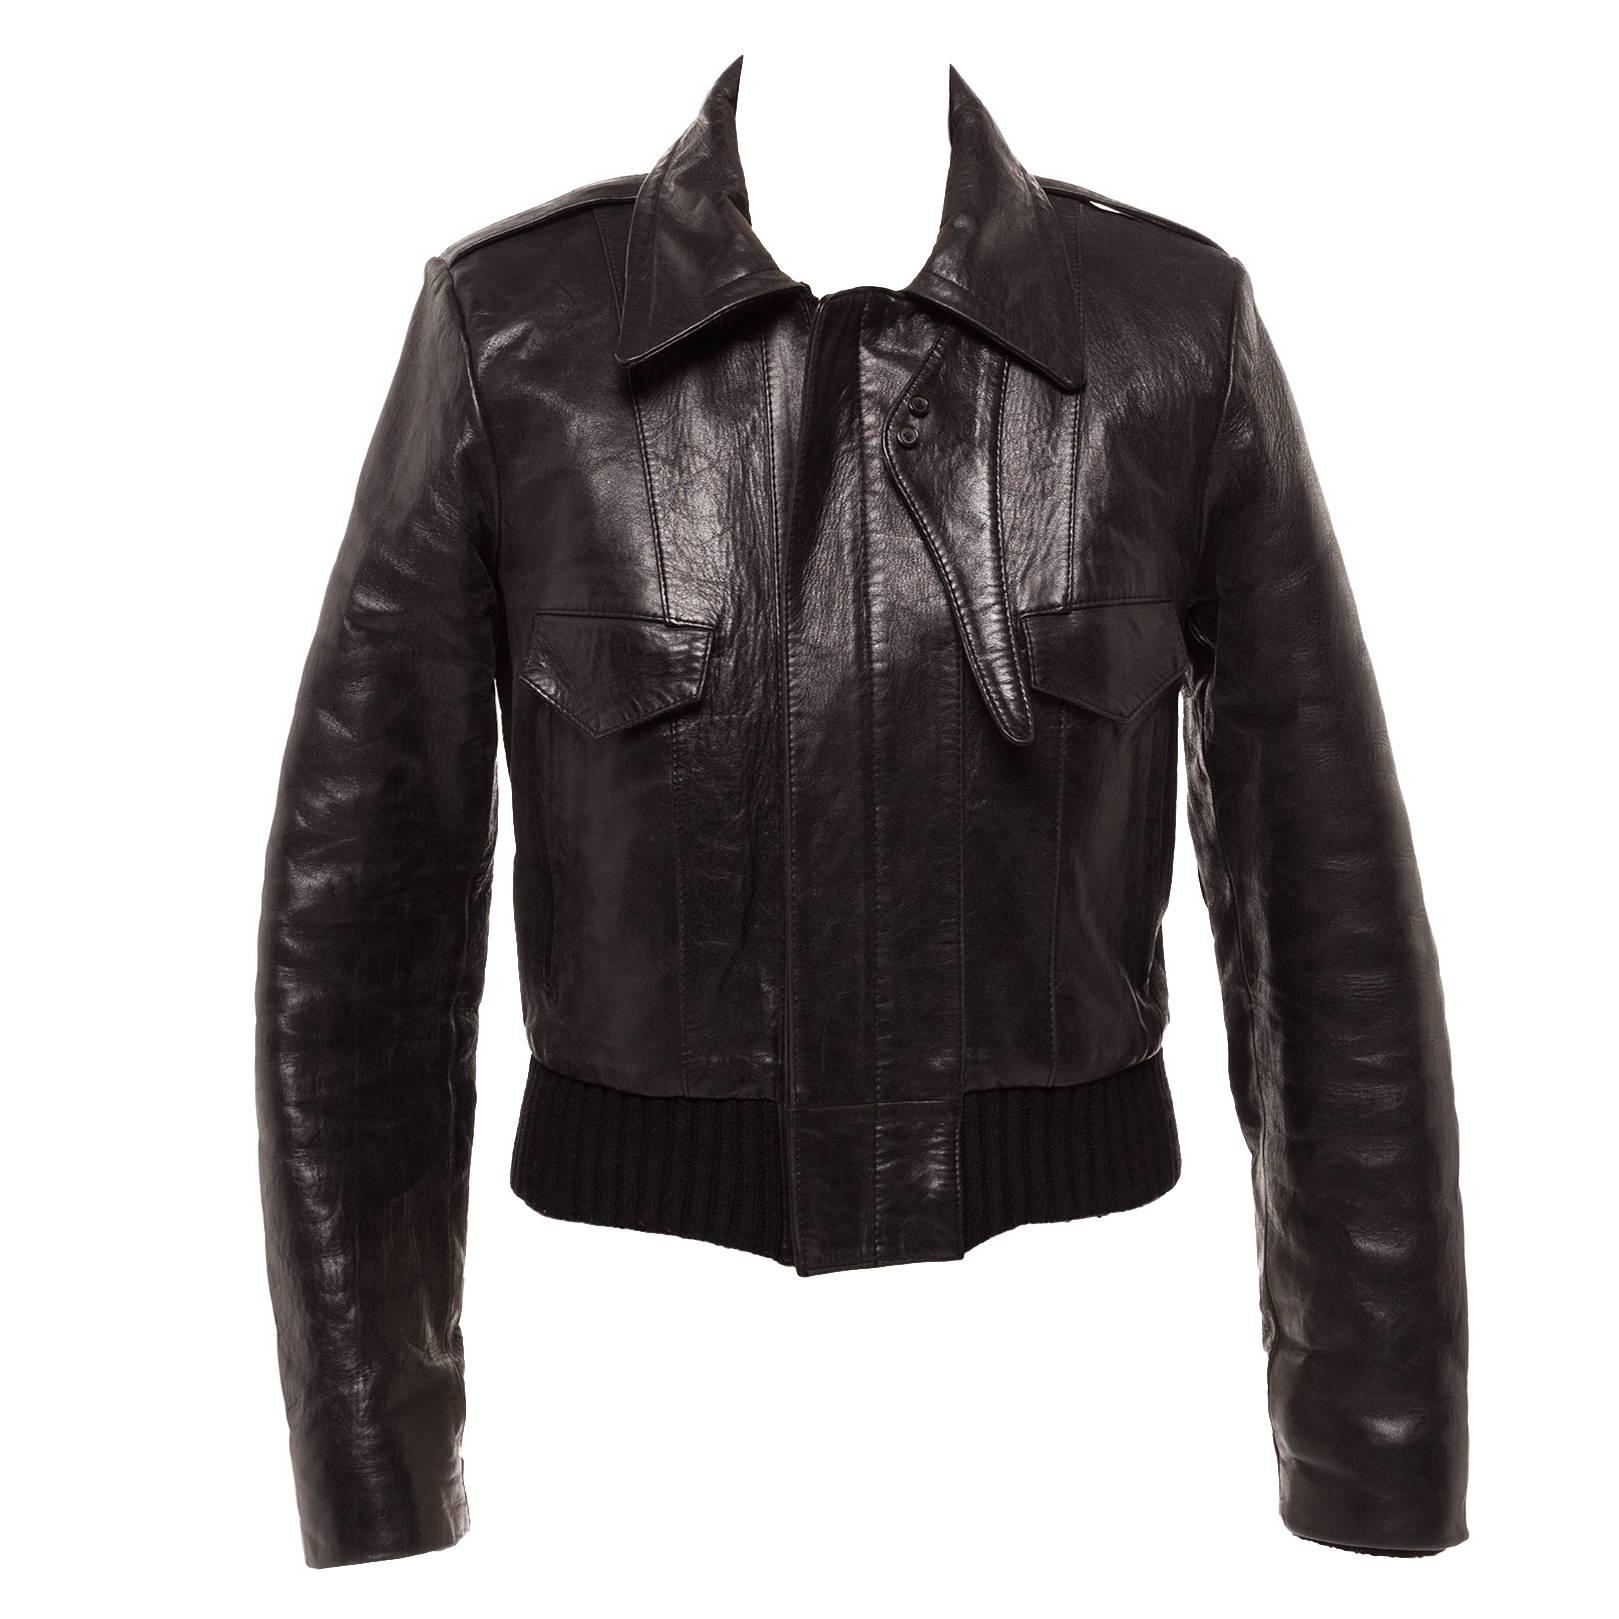 Balenciaga by Nicolas Ghesquiere Leather Bomber jacket, Sz. M For Sale